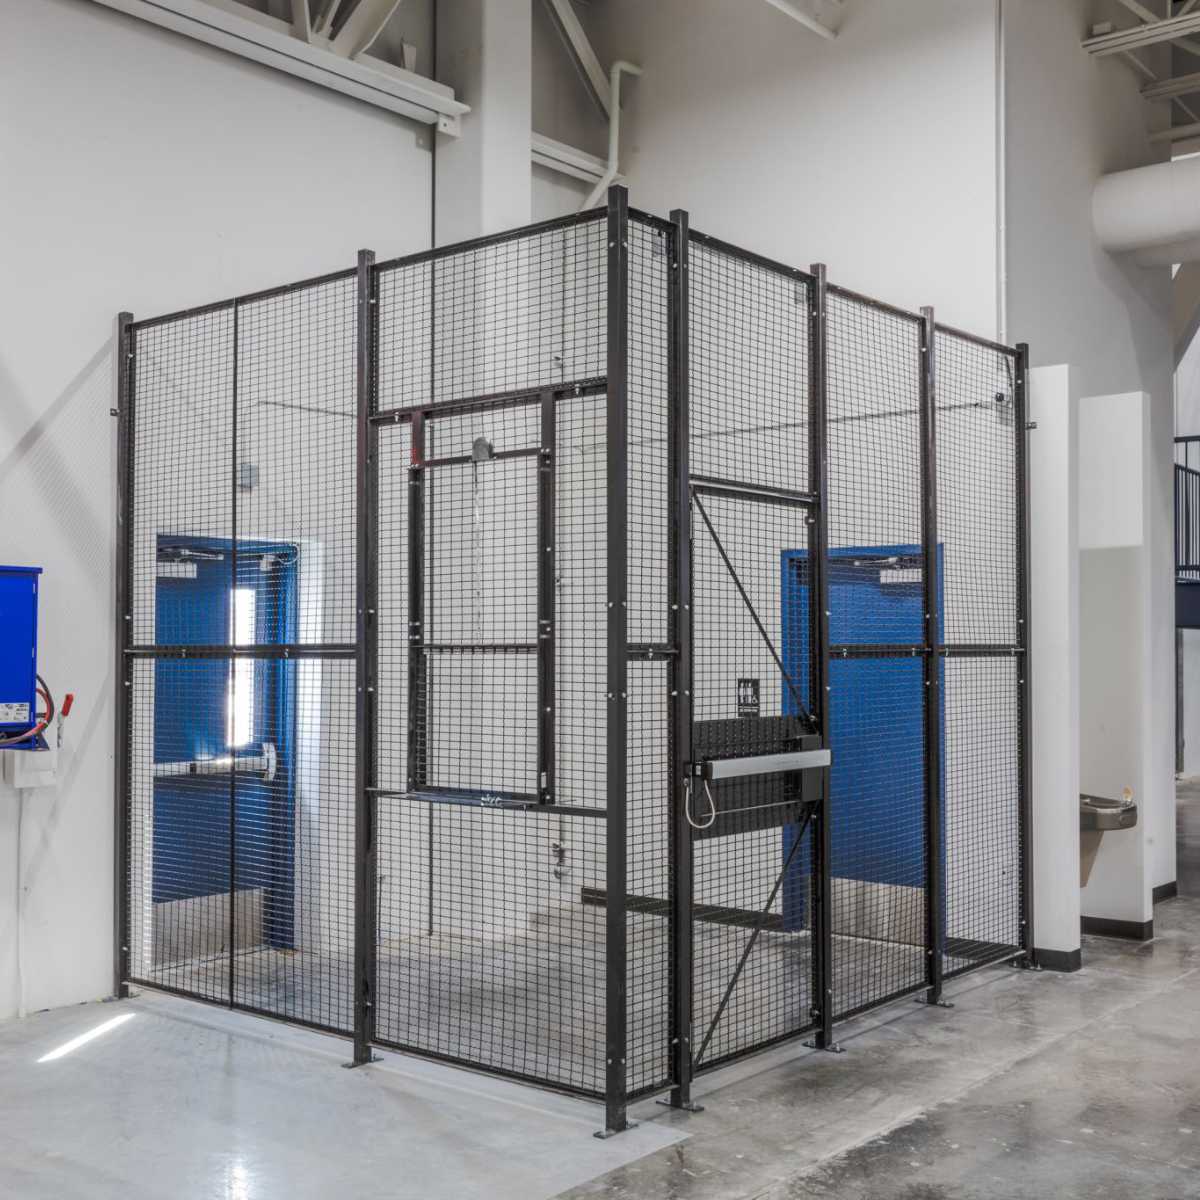 grey two-panel driver cage against building entrance